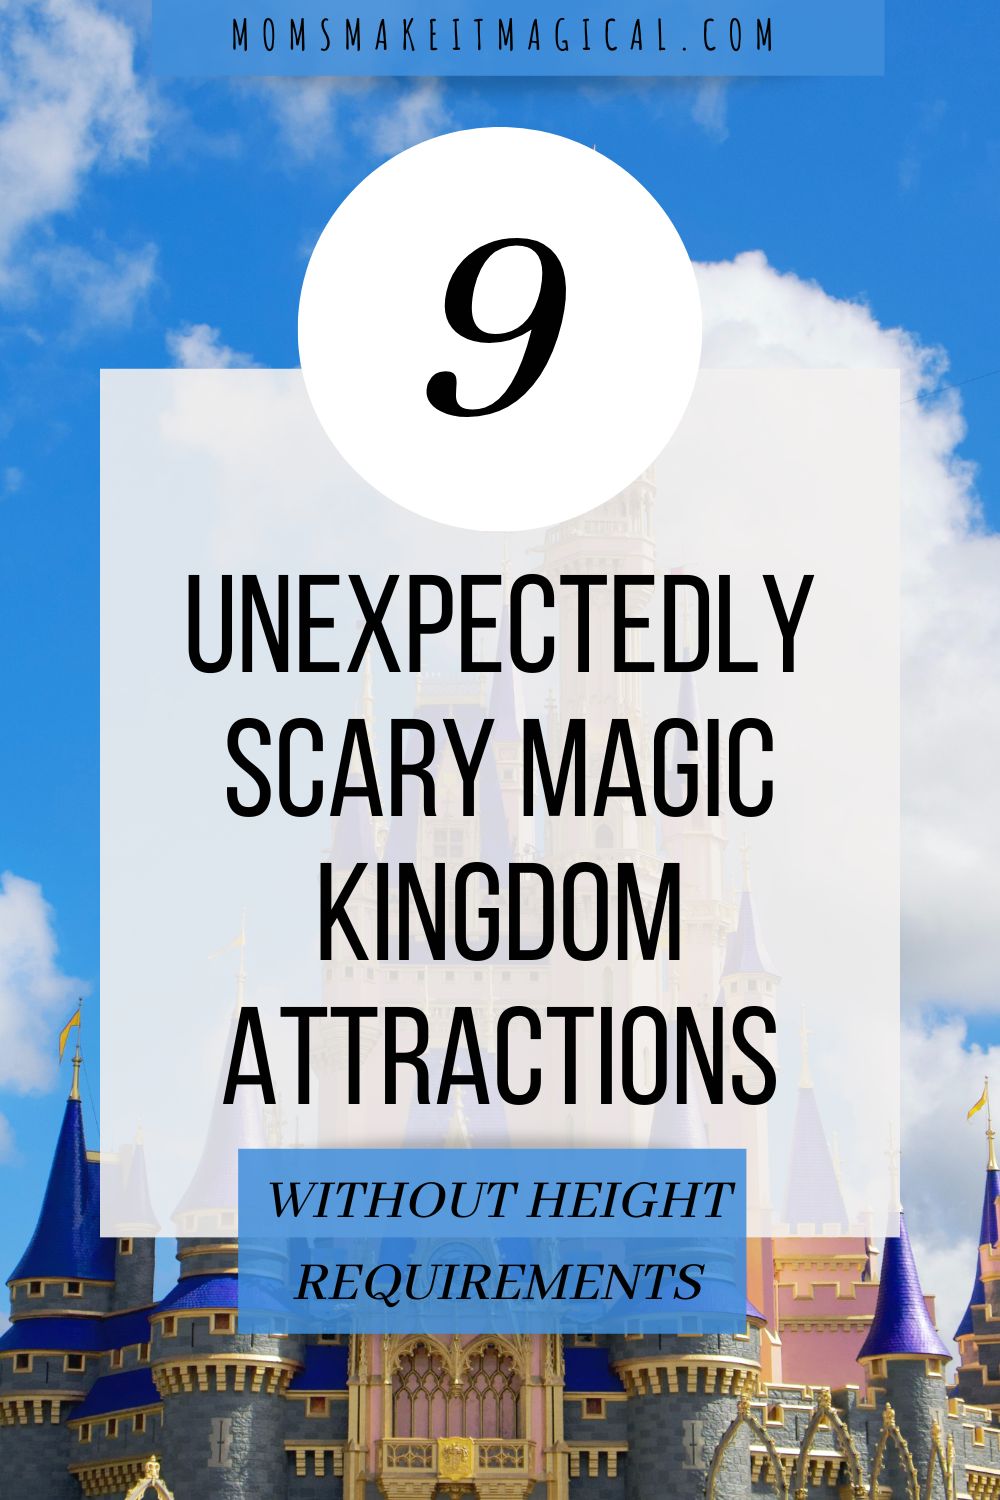 9 Unexpectedly Overstimulating Magic Kingdom Attractions WITHOUT Height Requirements